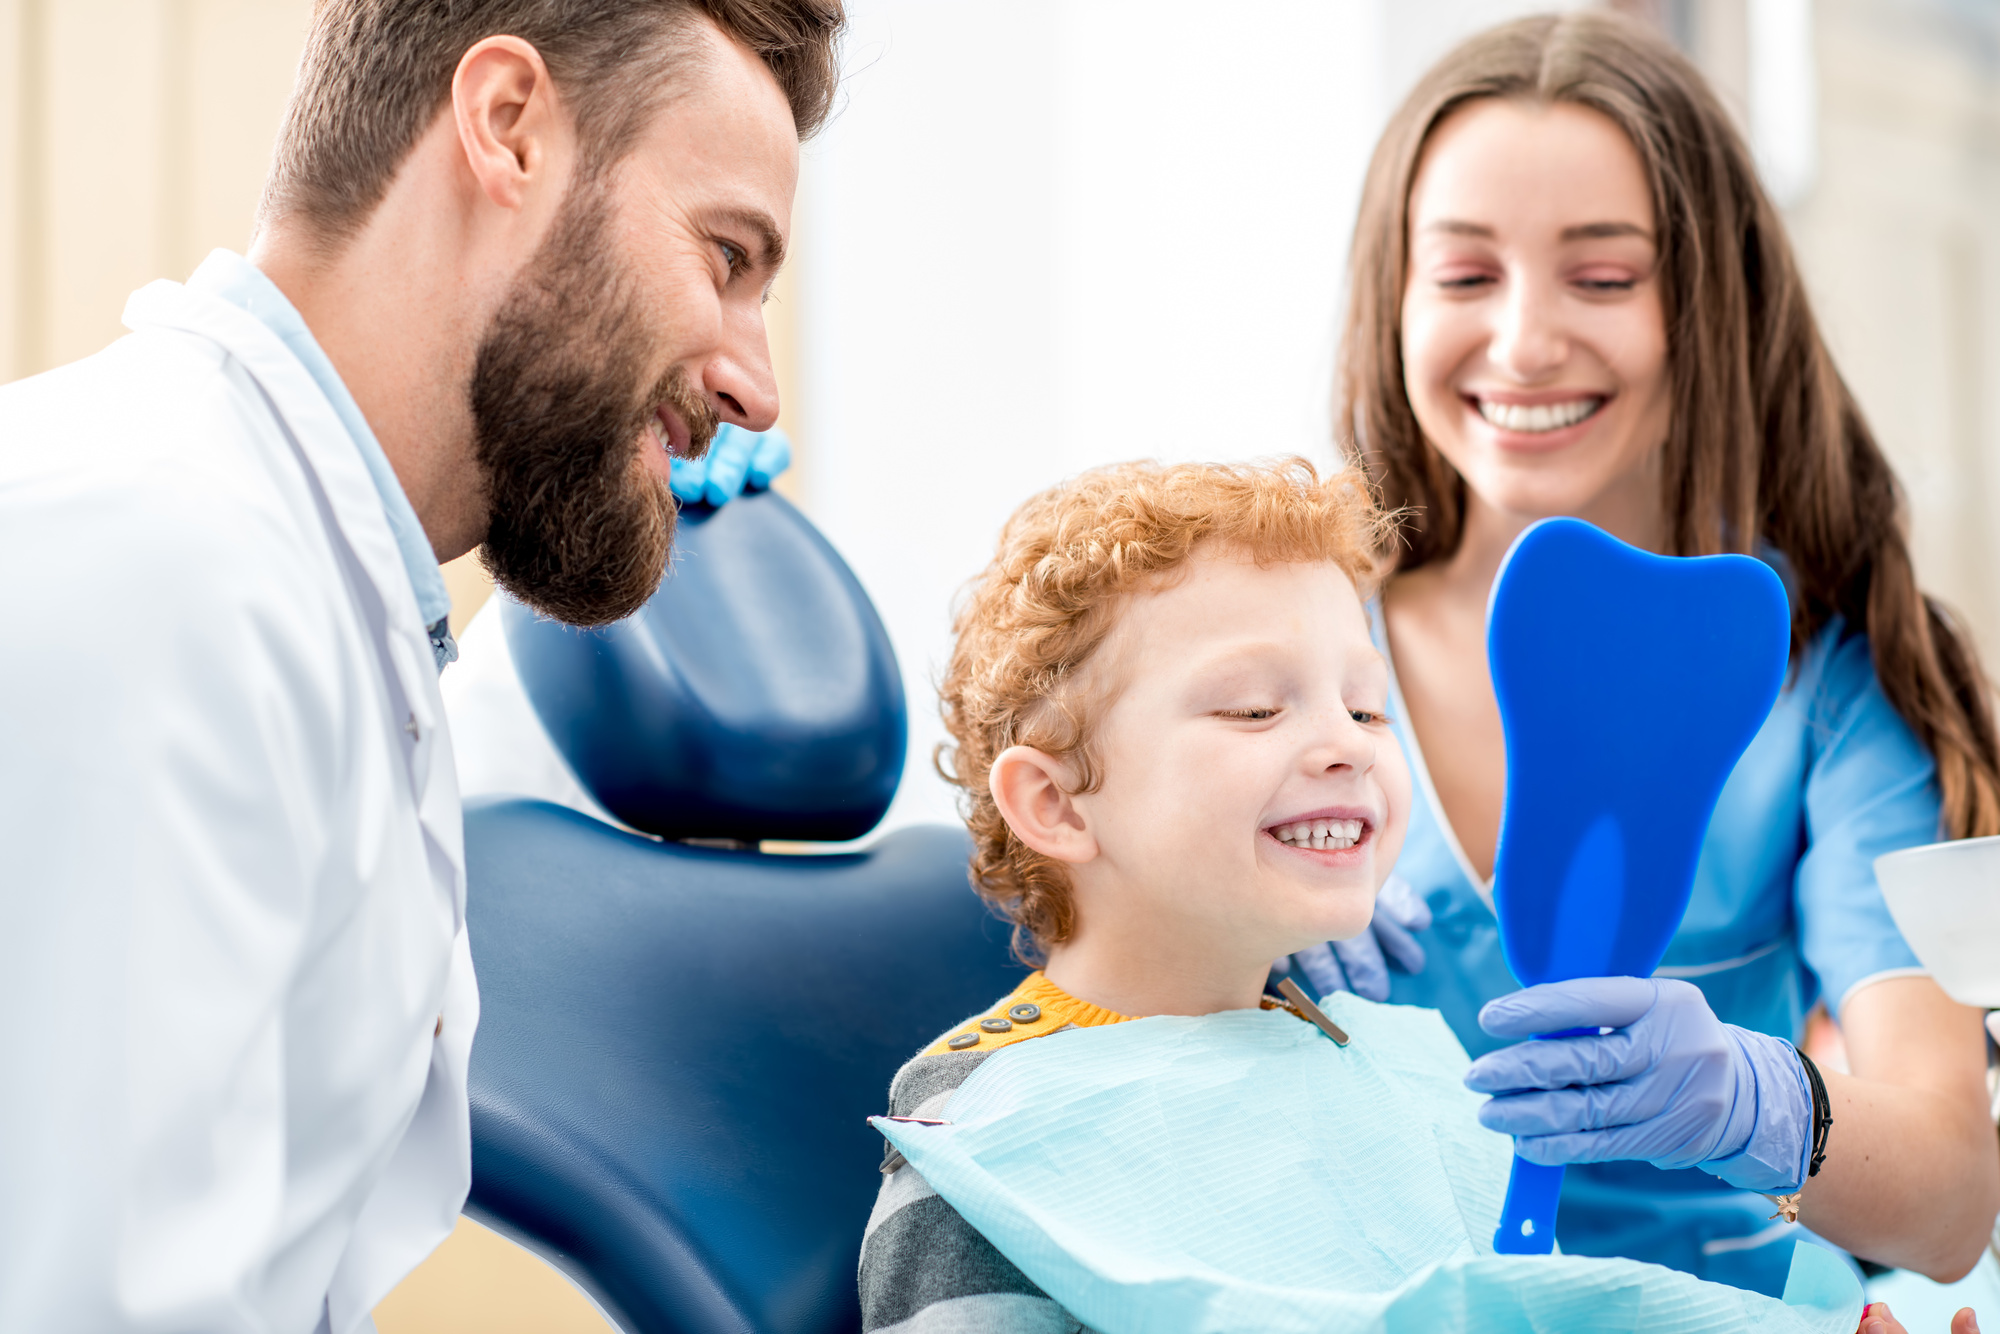 Are you on the hunt for a new family dentist? Here is a quick and informative guide on how to find the best dentist for you and your family.